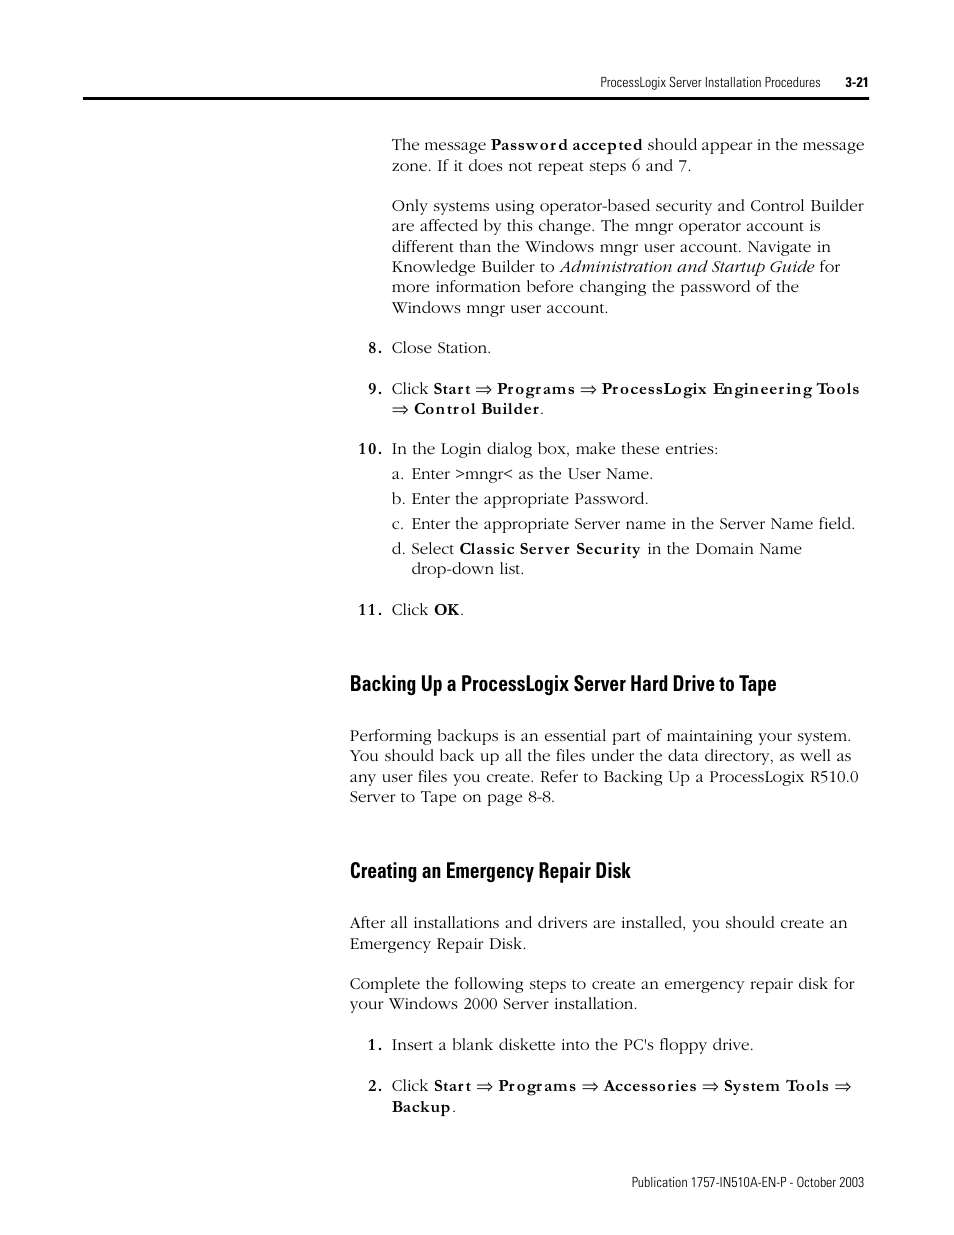 Creating an emergency repair disk | Rockwell Automation 1757-SWKIT5100 ProcessLogix R510.0 Installation and Upgrade Guide User Manual | Page 83 / 271